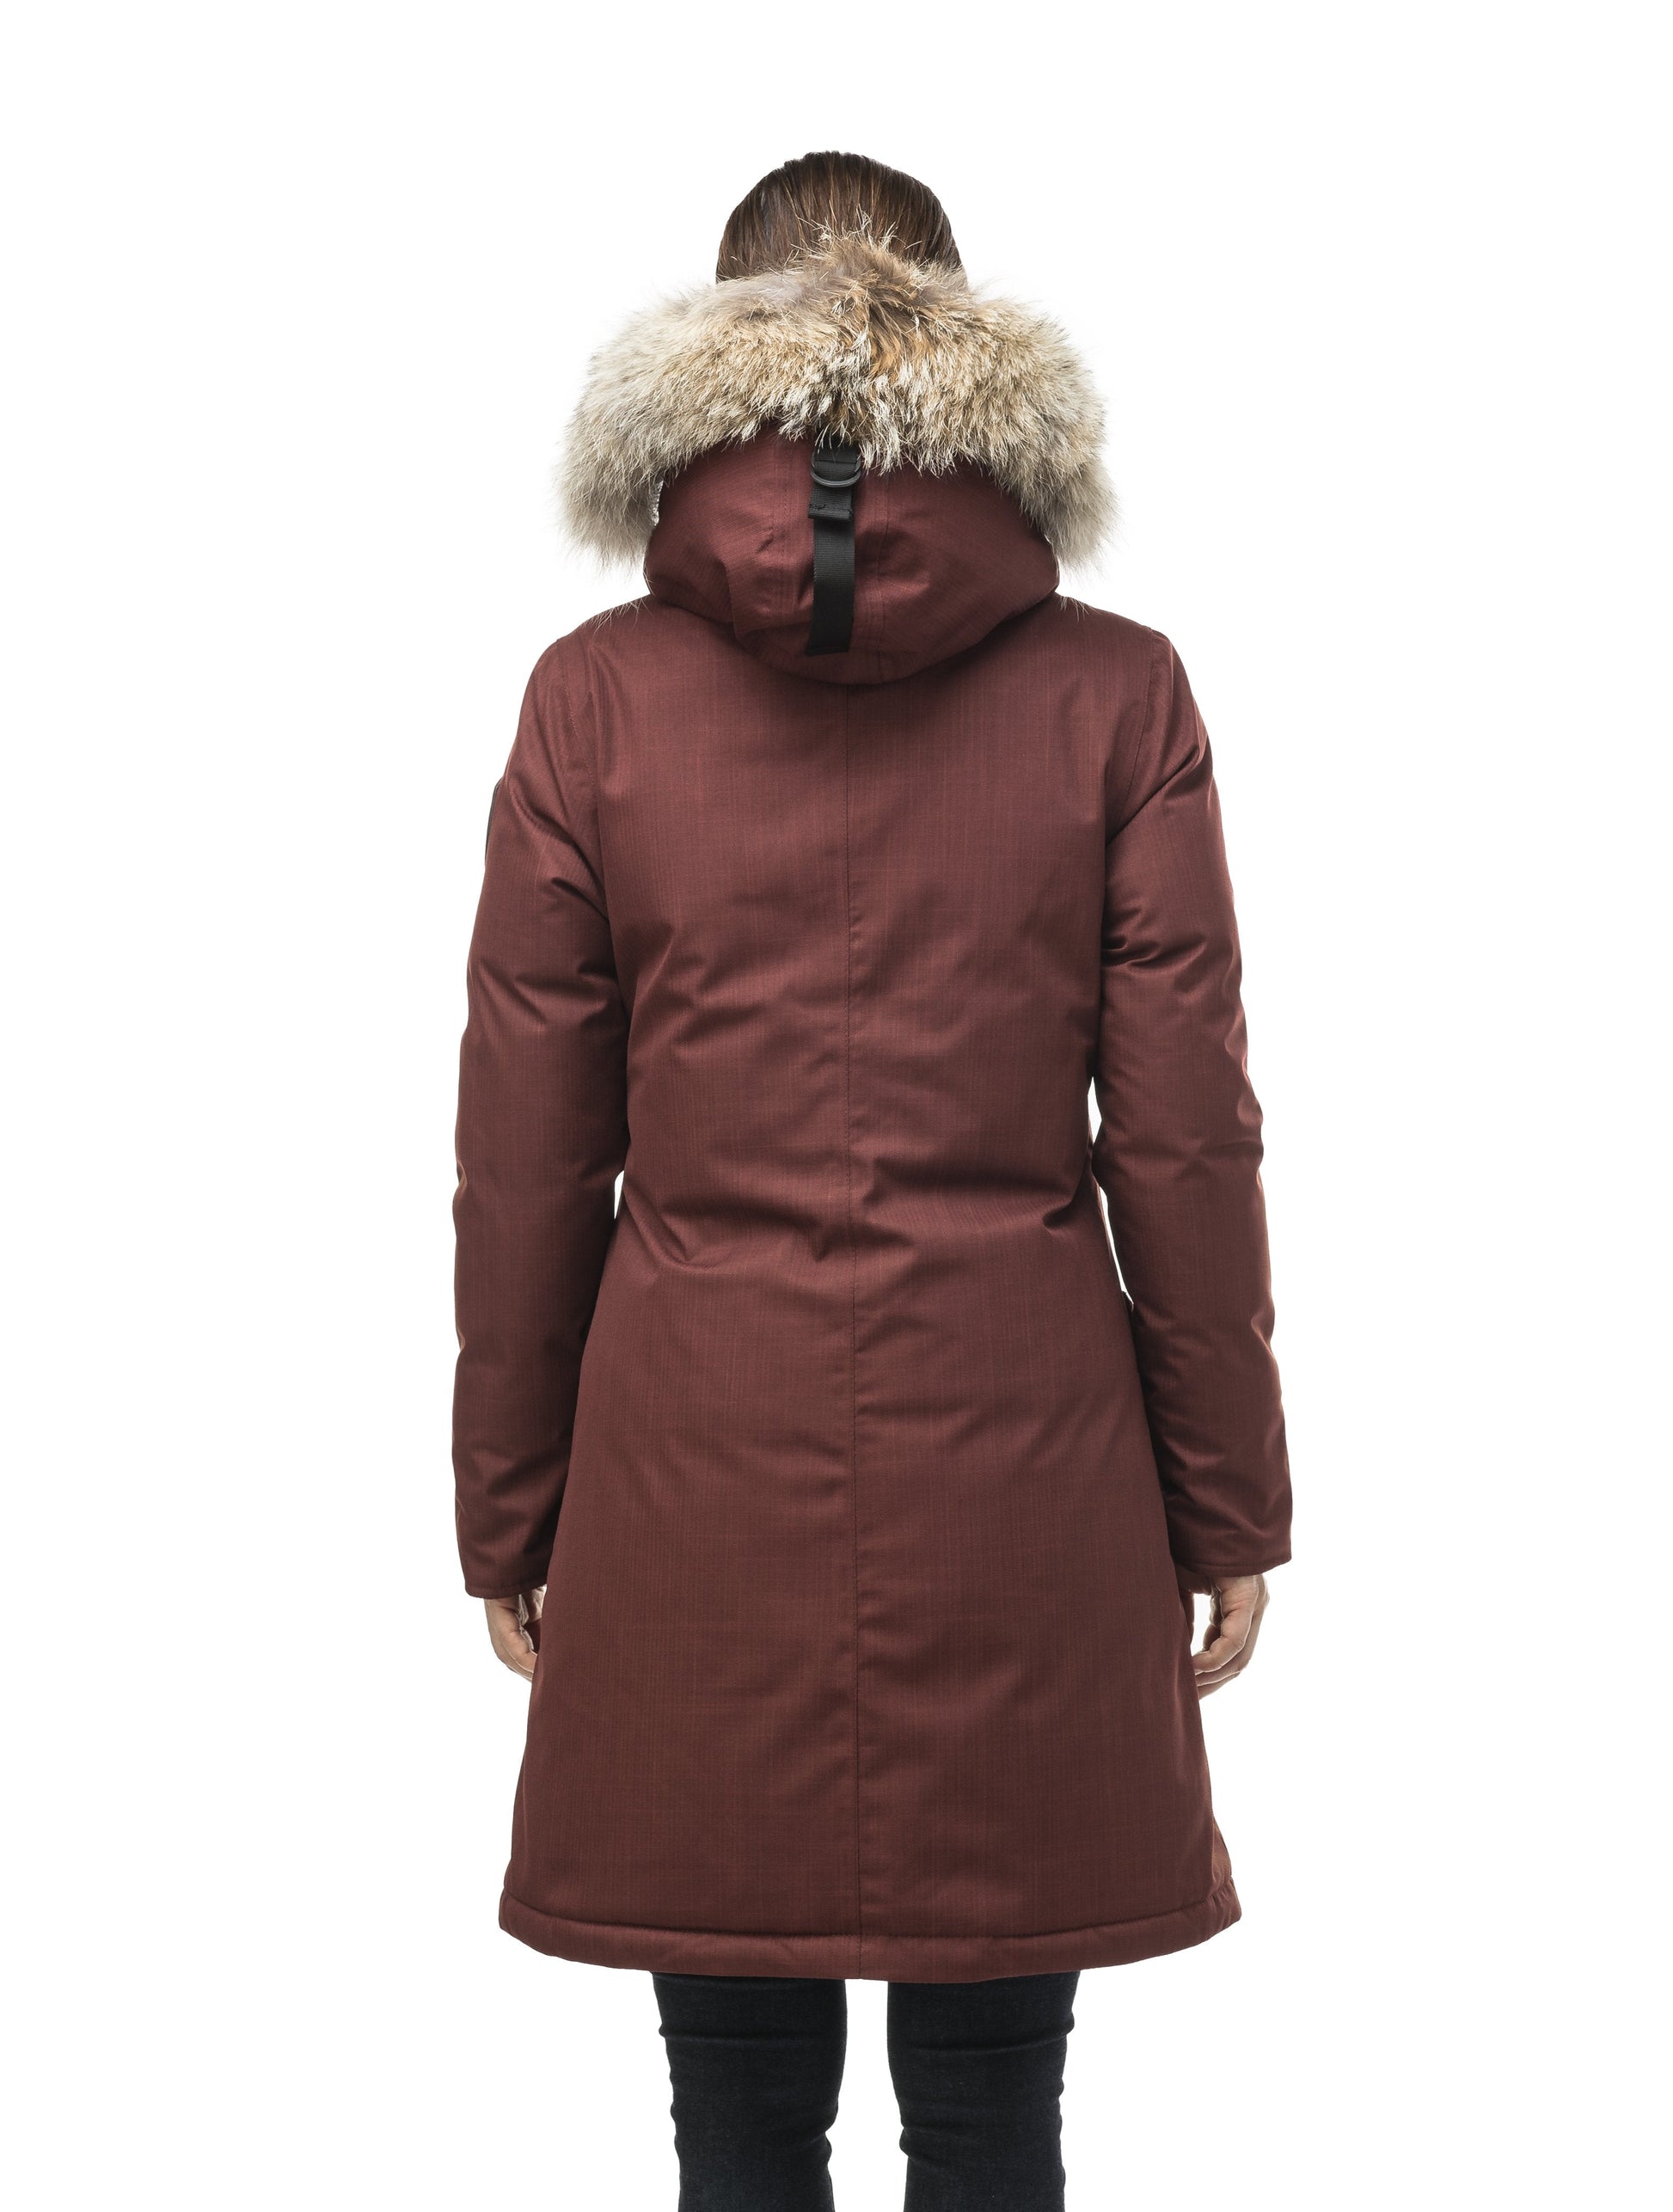 Best selling women's down filled knee length parka with removable down filled hood in CH Rum